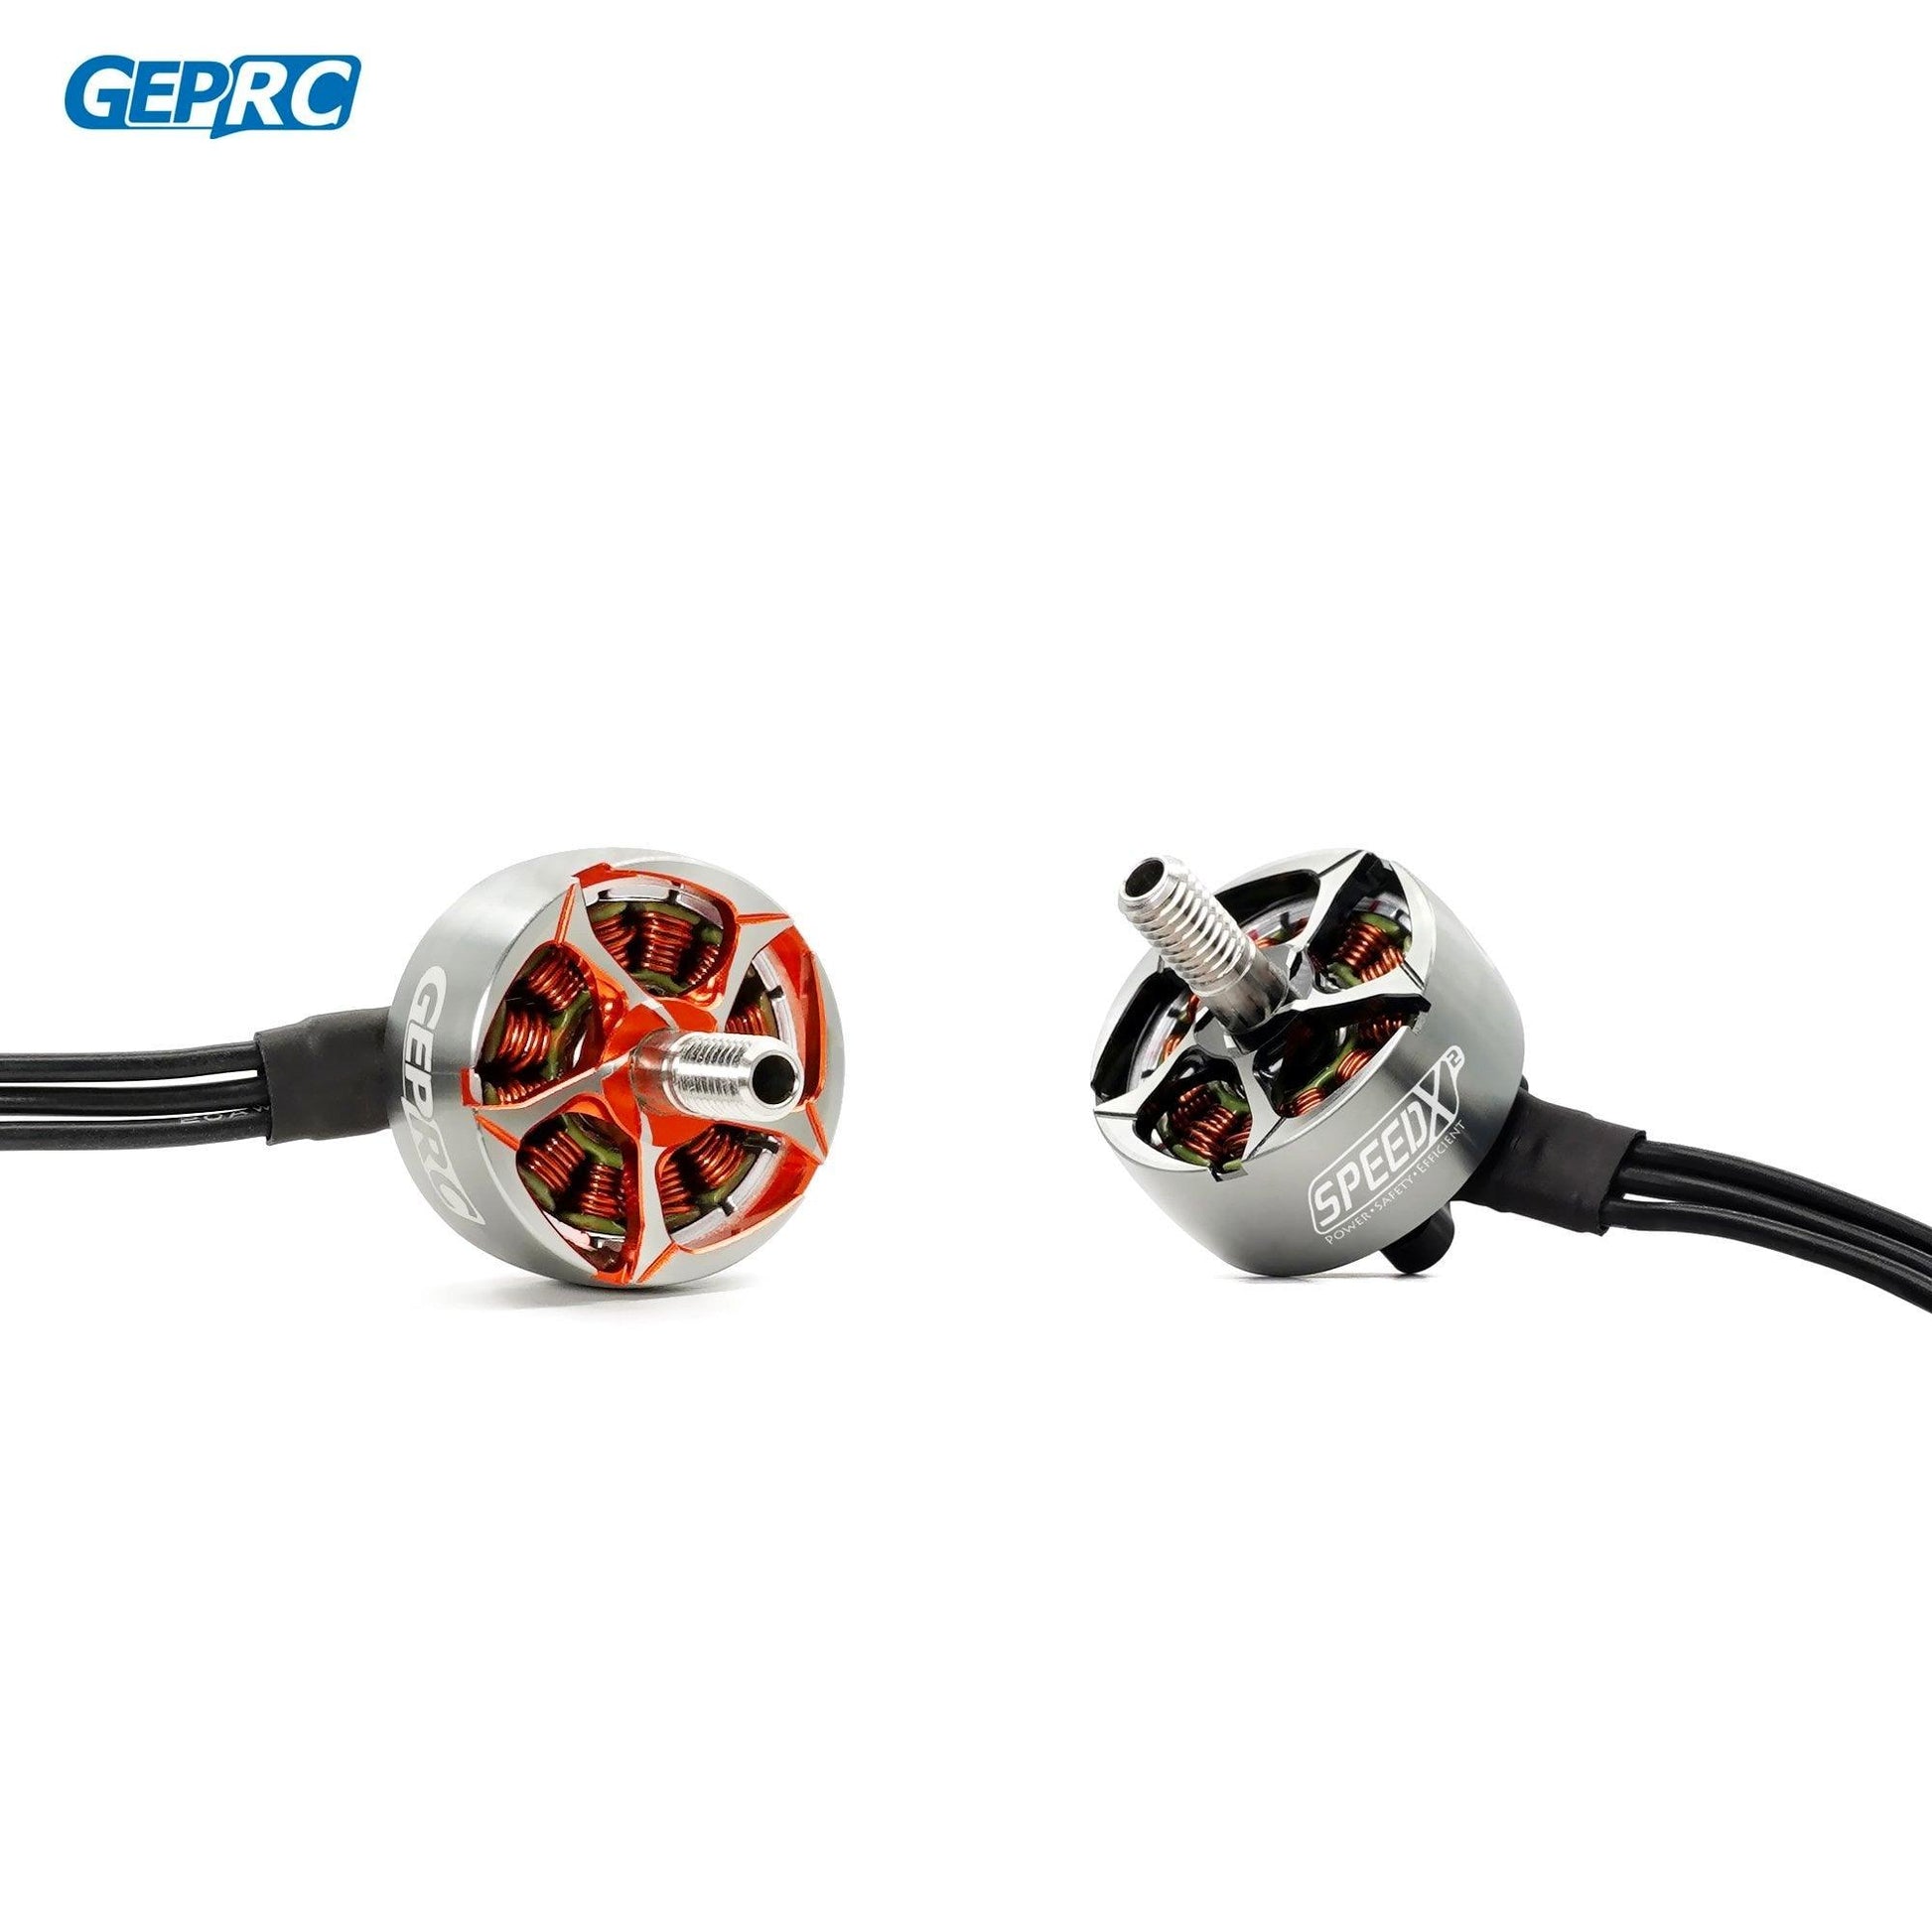 GEPRC SPEEDX2 Motor - 2107.5 1960KV/2450KV Motor Suitable For DIY RC FPV Quadcopter Freestyle Racing Drone Accessories Replacement Parts - RCDrone